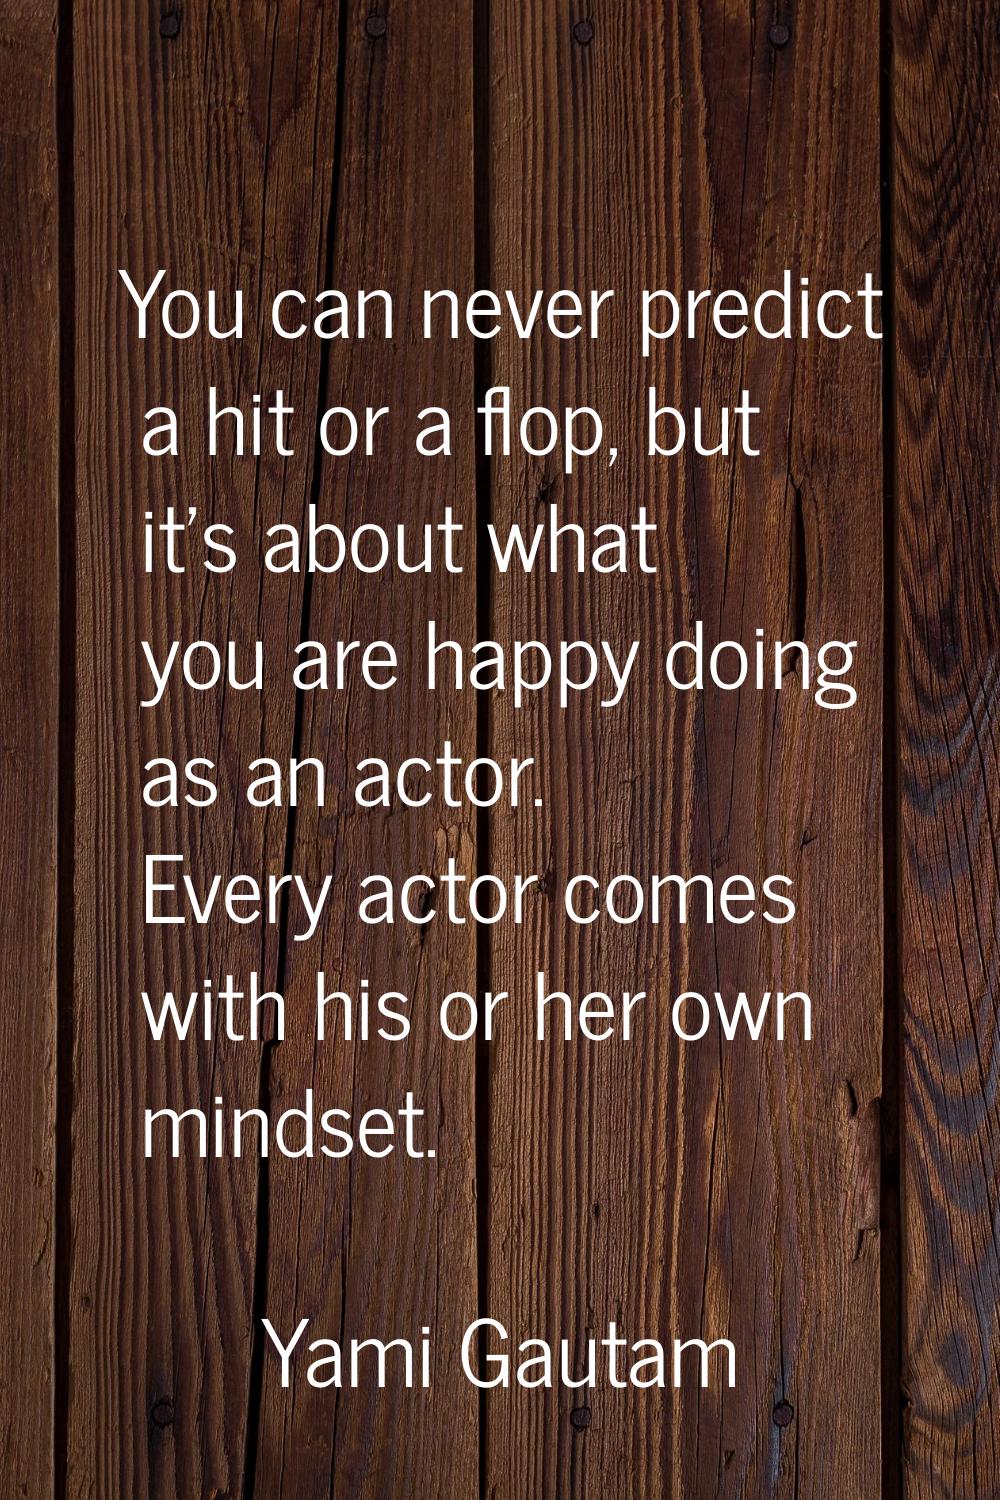 You can never predict a hit or a flop, but it's about what you are happy doing as an actor. Every a